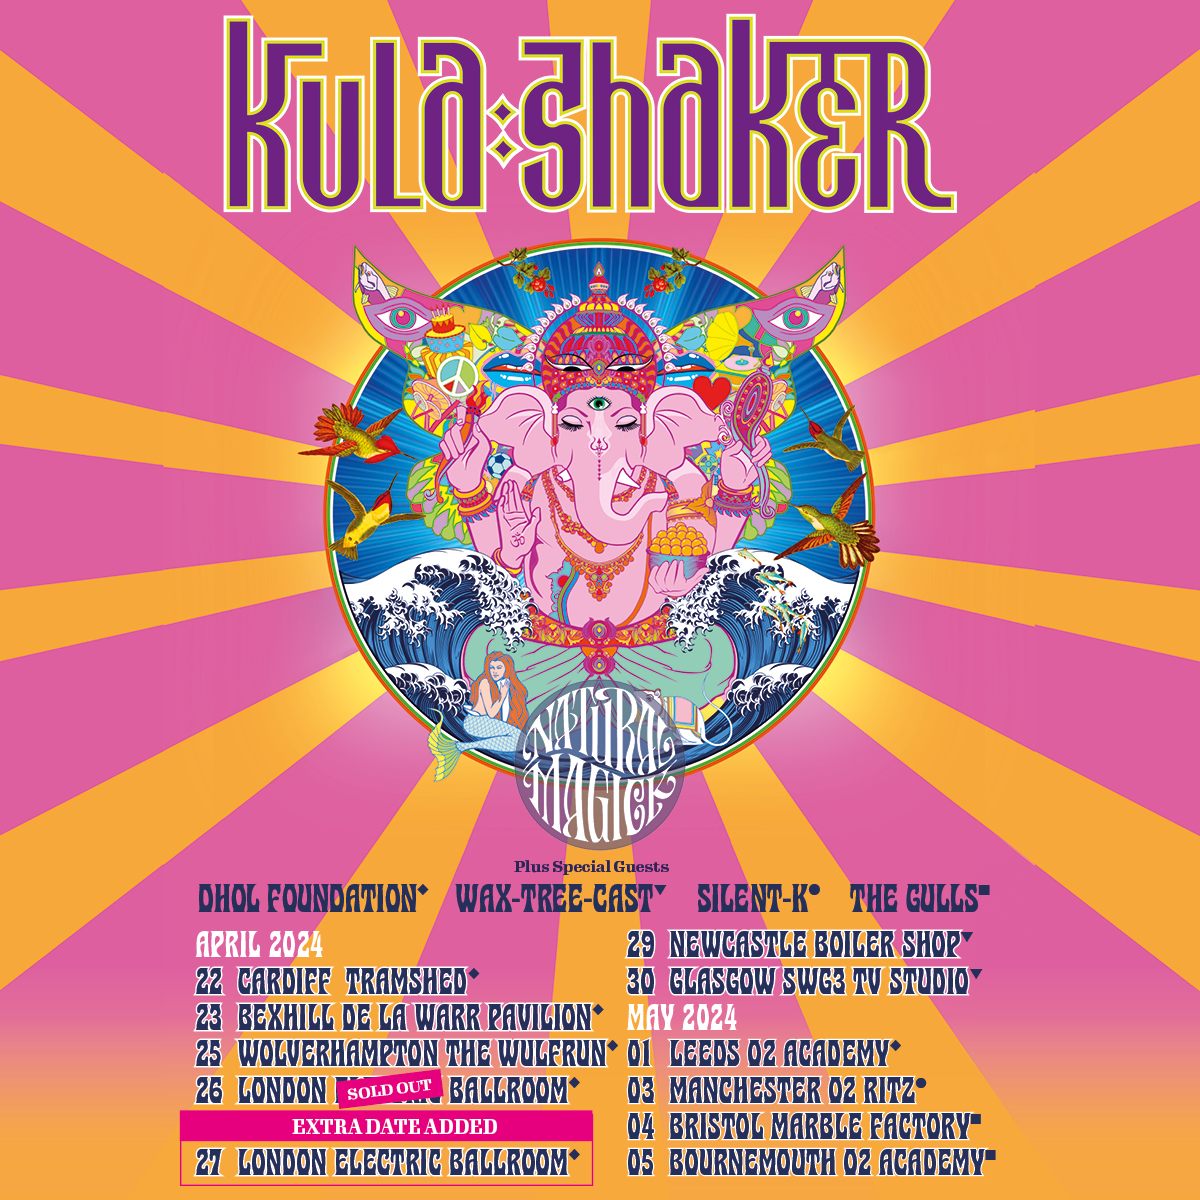 SUPPORT ANNOUNCEMENT📣 @Dholfoundation will bring their extra banging bhangra spice to Bexhill as the support act for @kulashaker on Tuesday 23 April Tickets for this show are still available at dlwp.com/event/kula-sha…